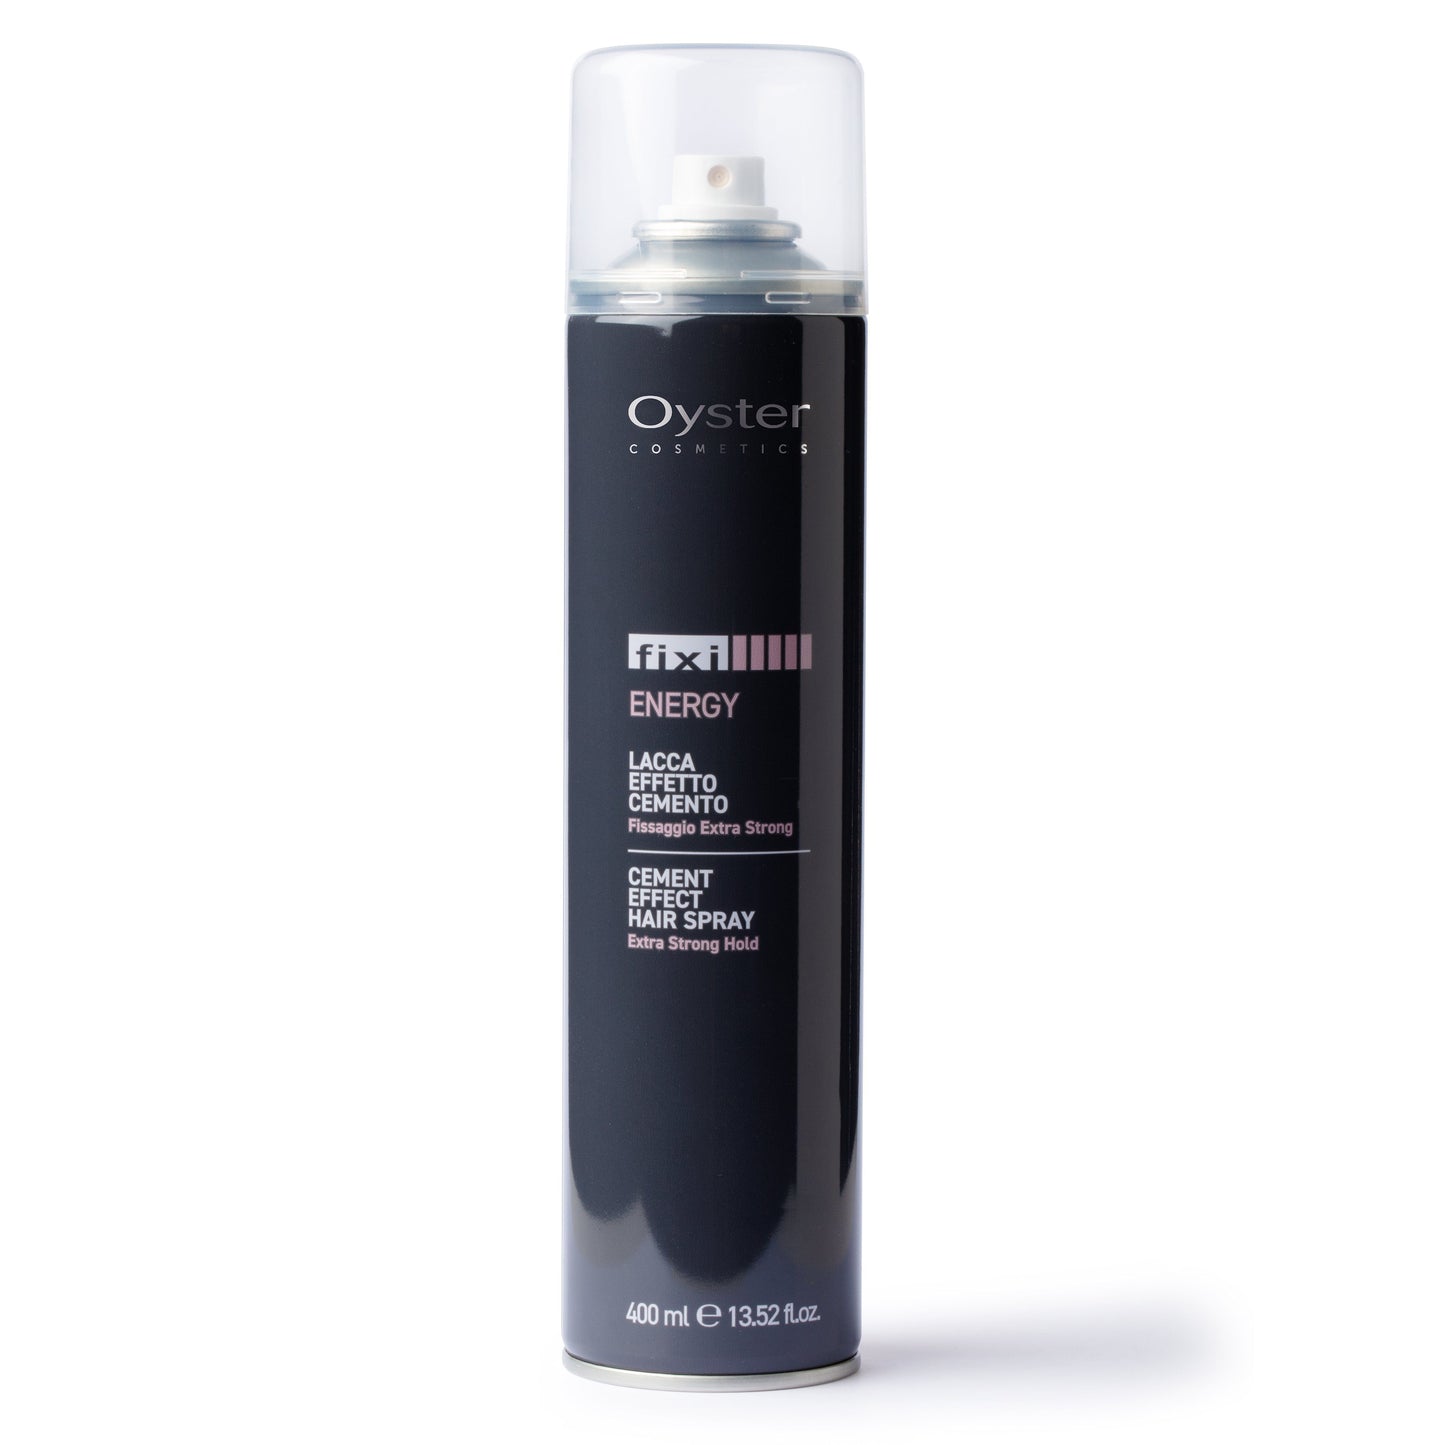 Hairspray Energy Cement-Effect | FIXI HAIR STYLING PRODUCTS OYSTER 